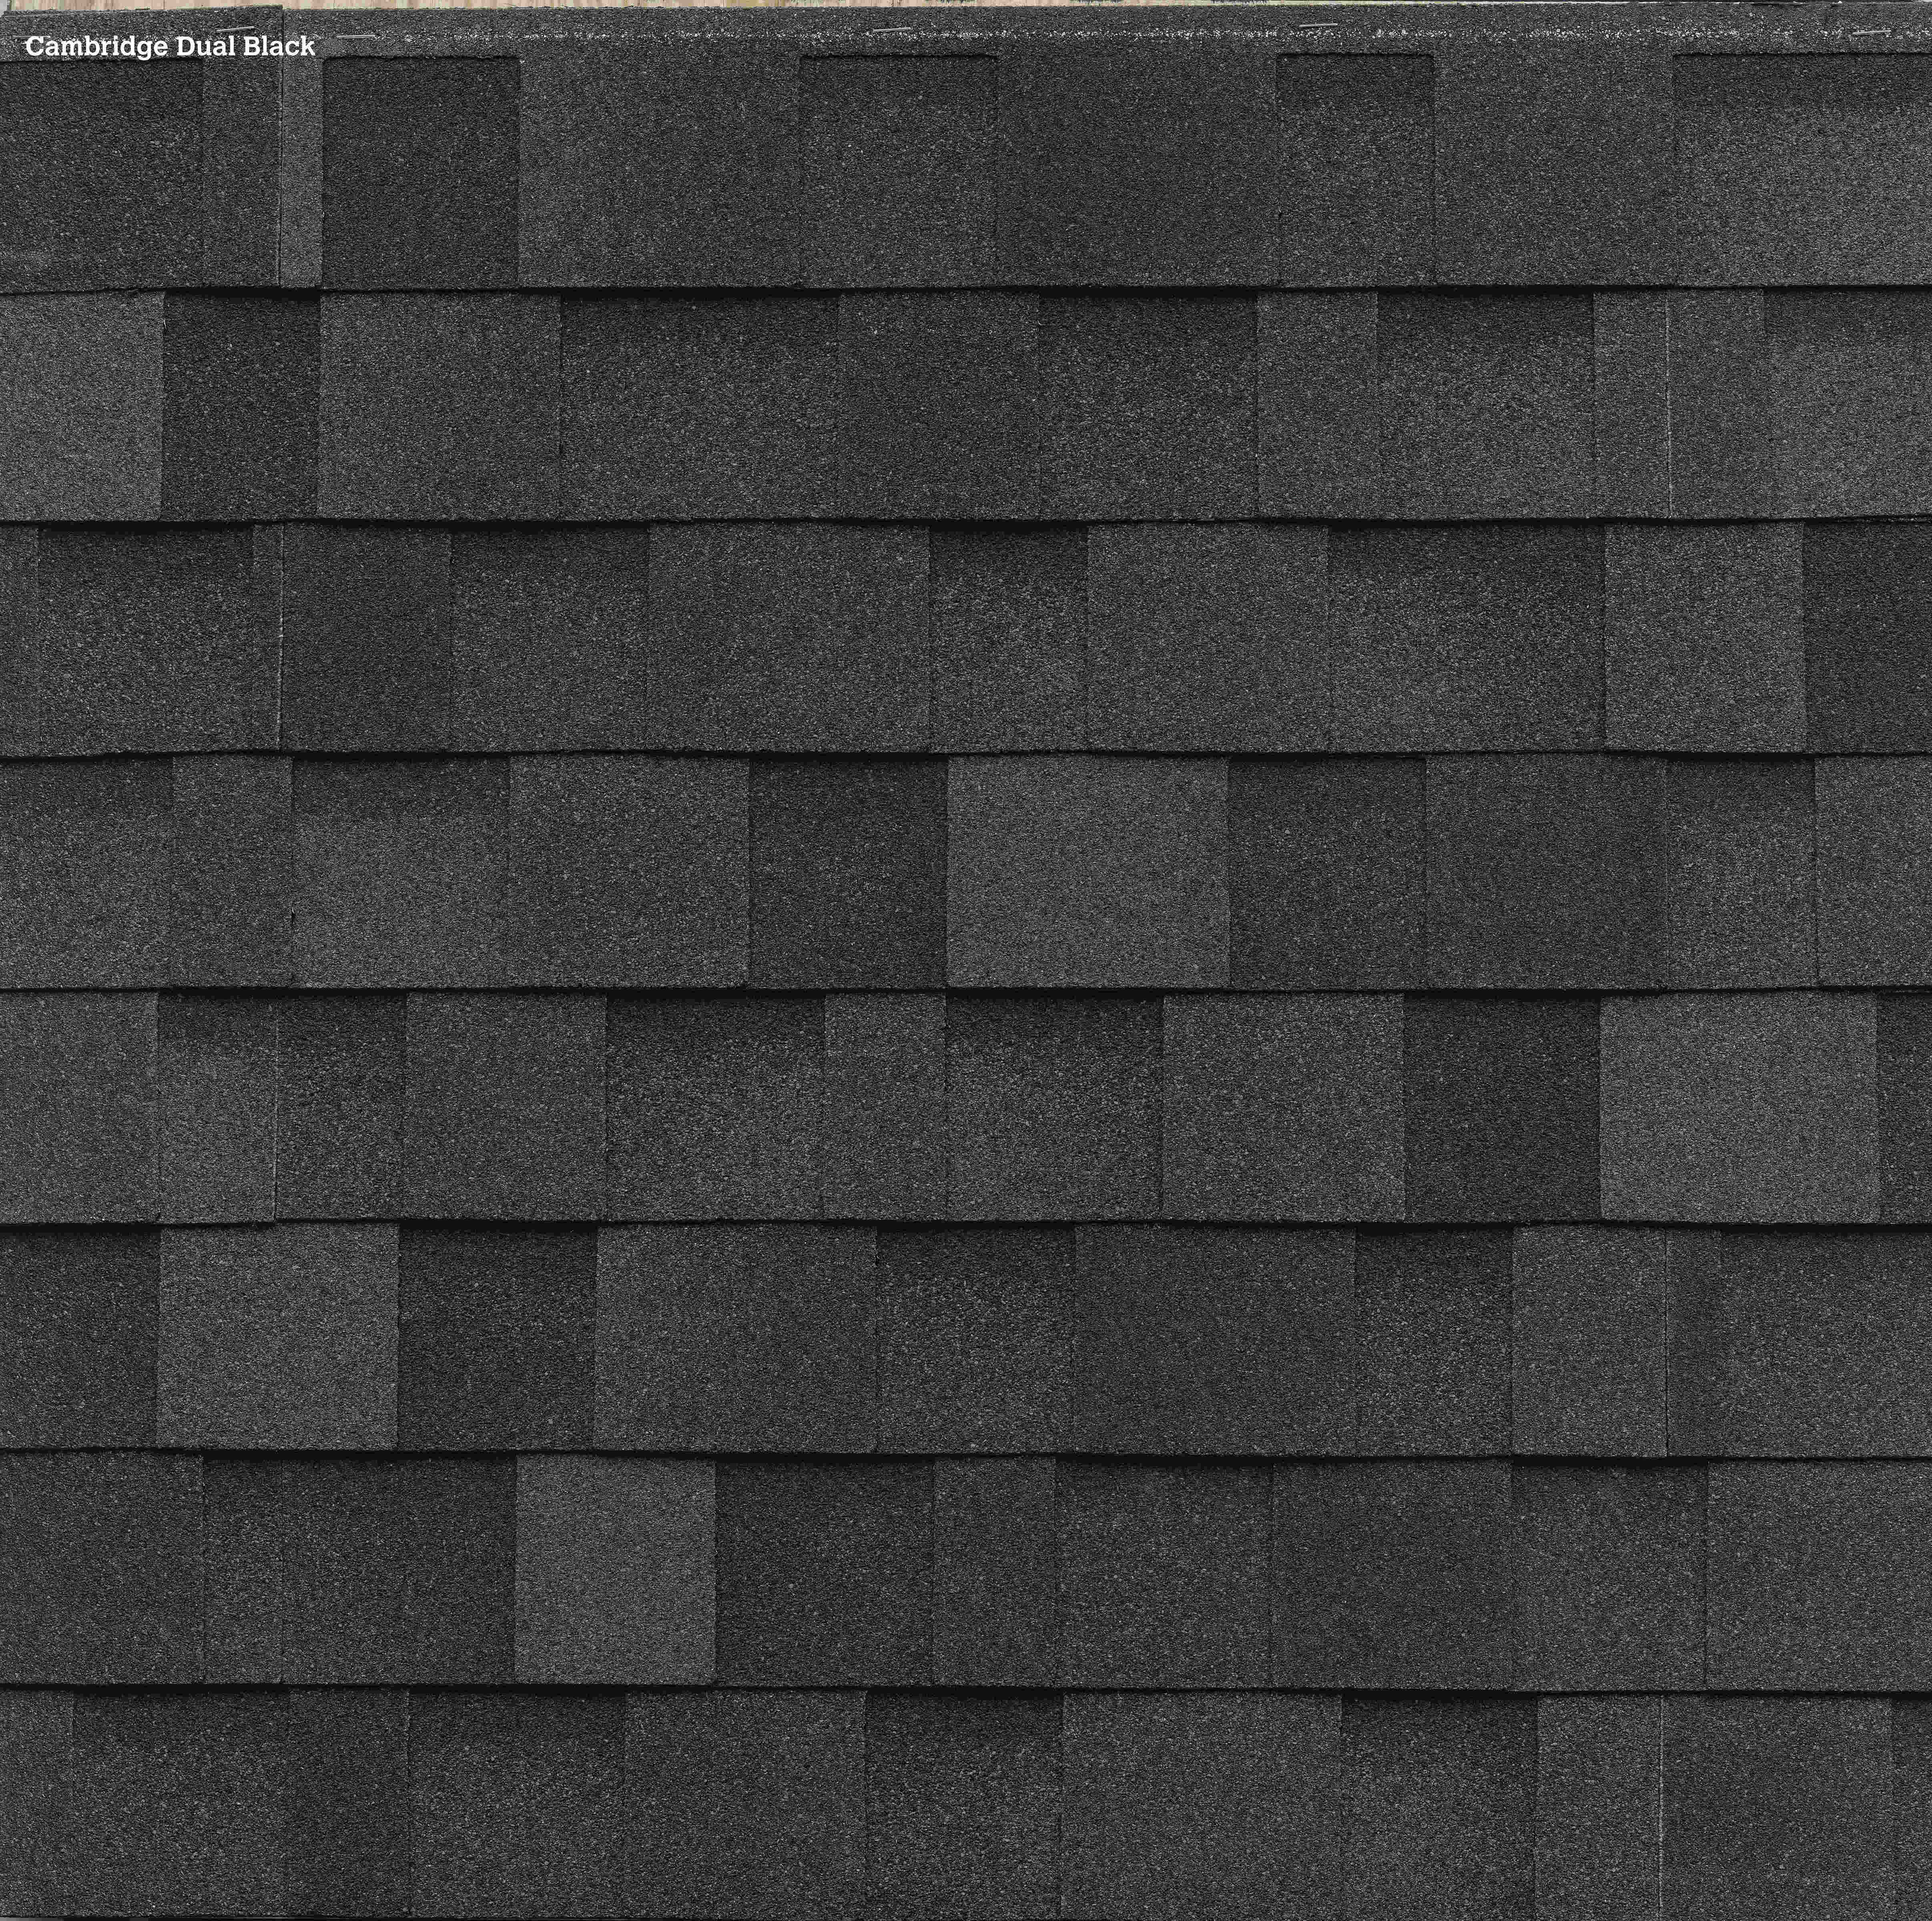 Dual Black Architectural Shingles Shed Color